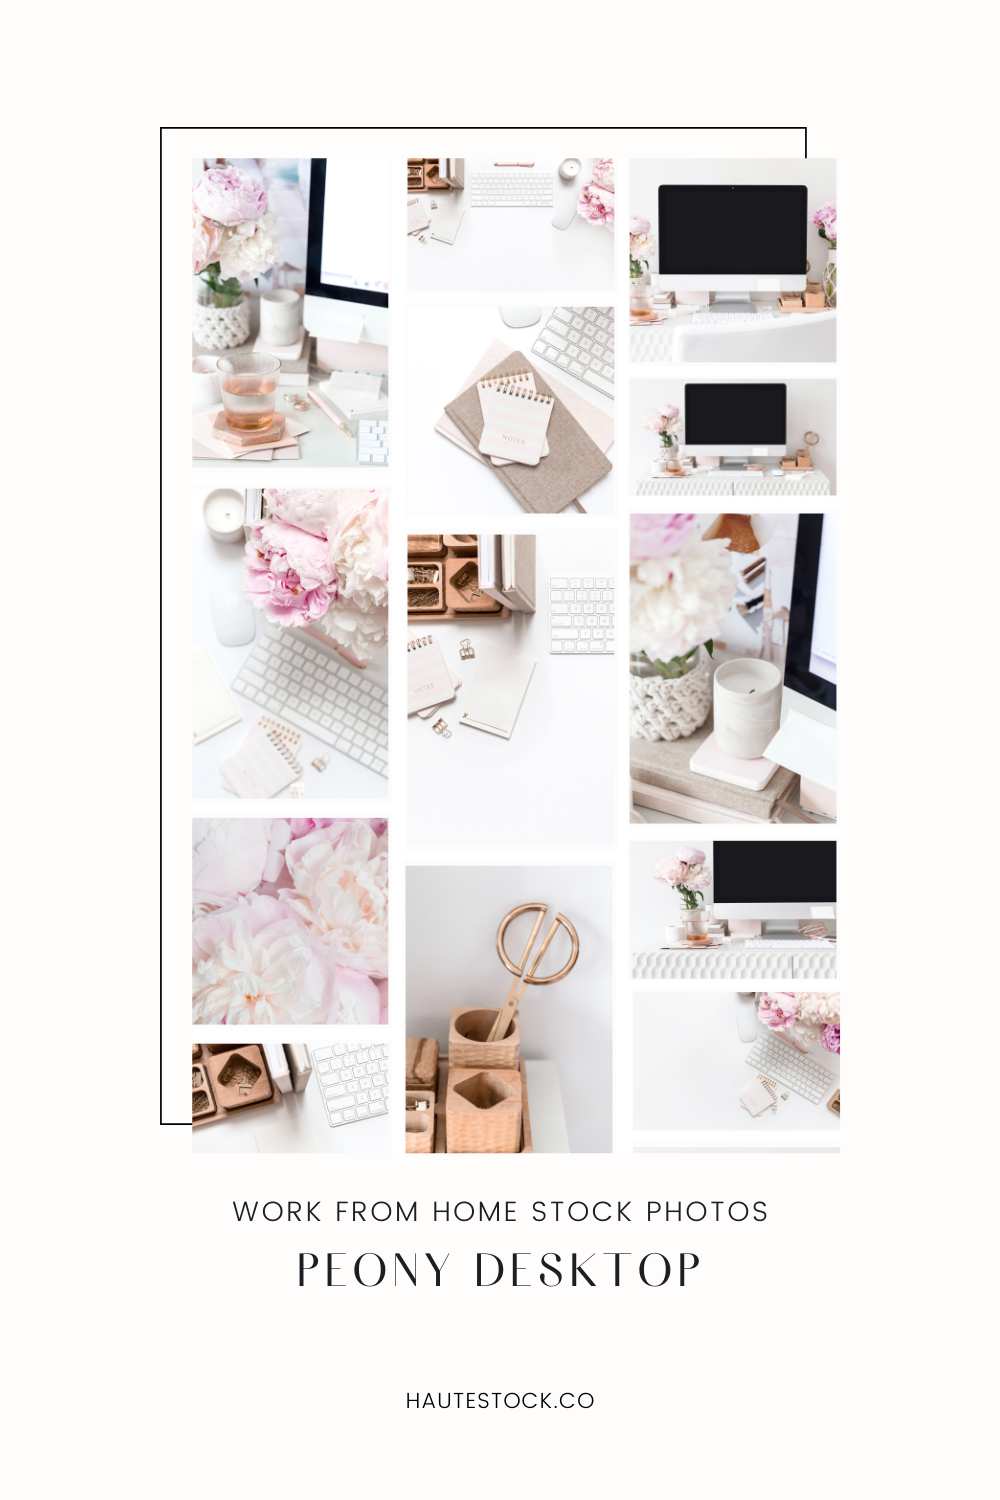 Pink peony home office styled stock photos for feminine brands